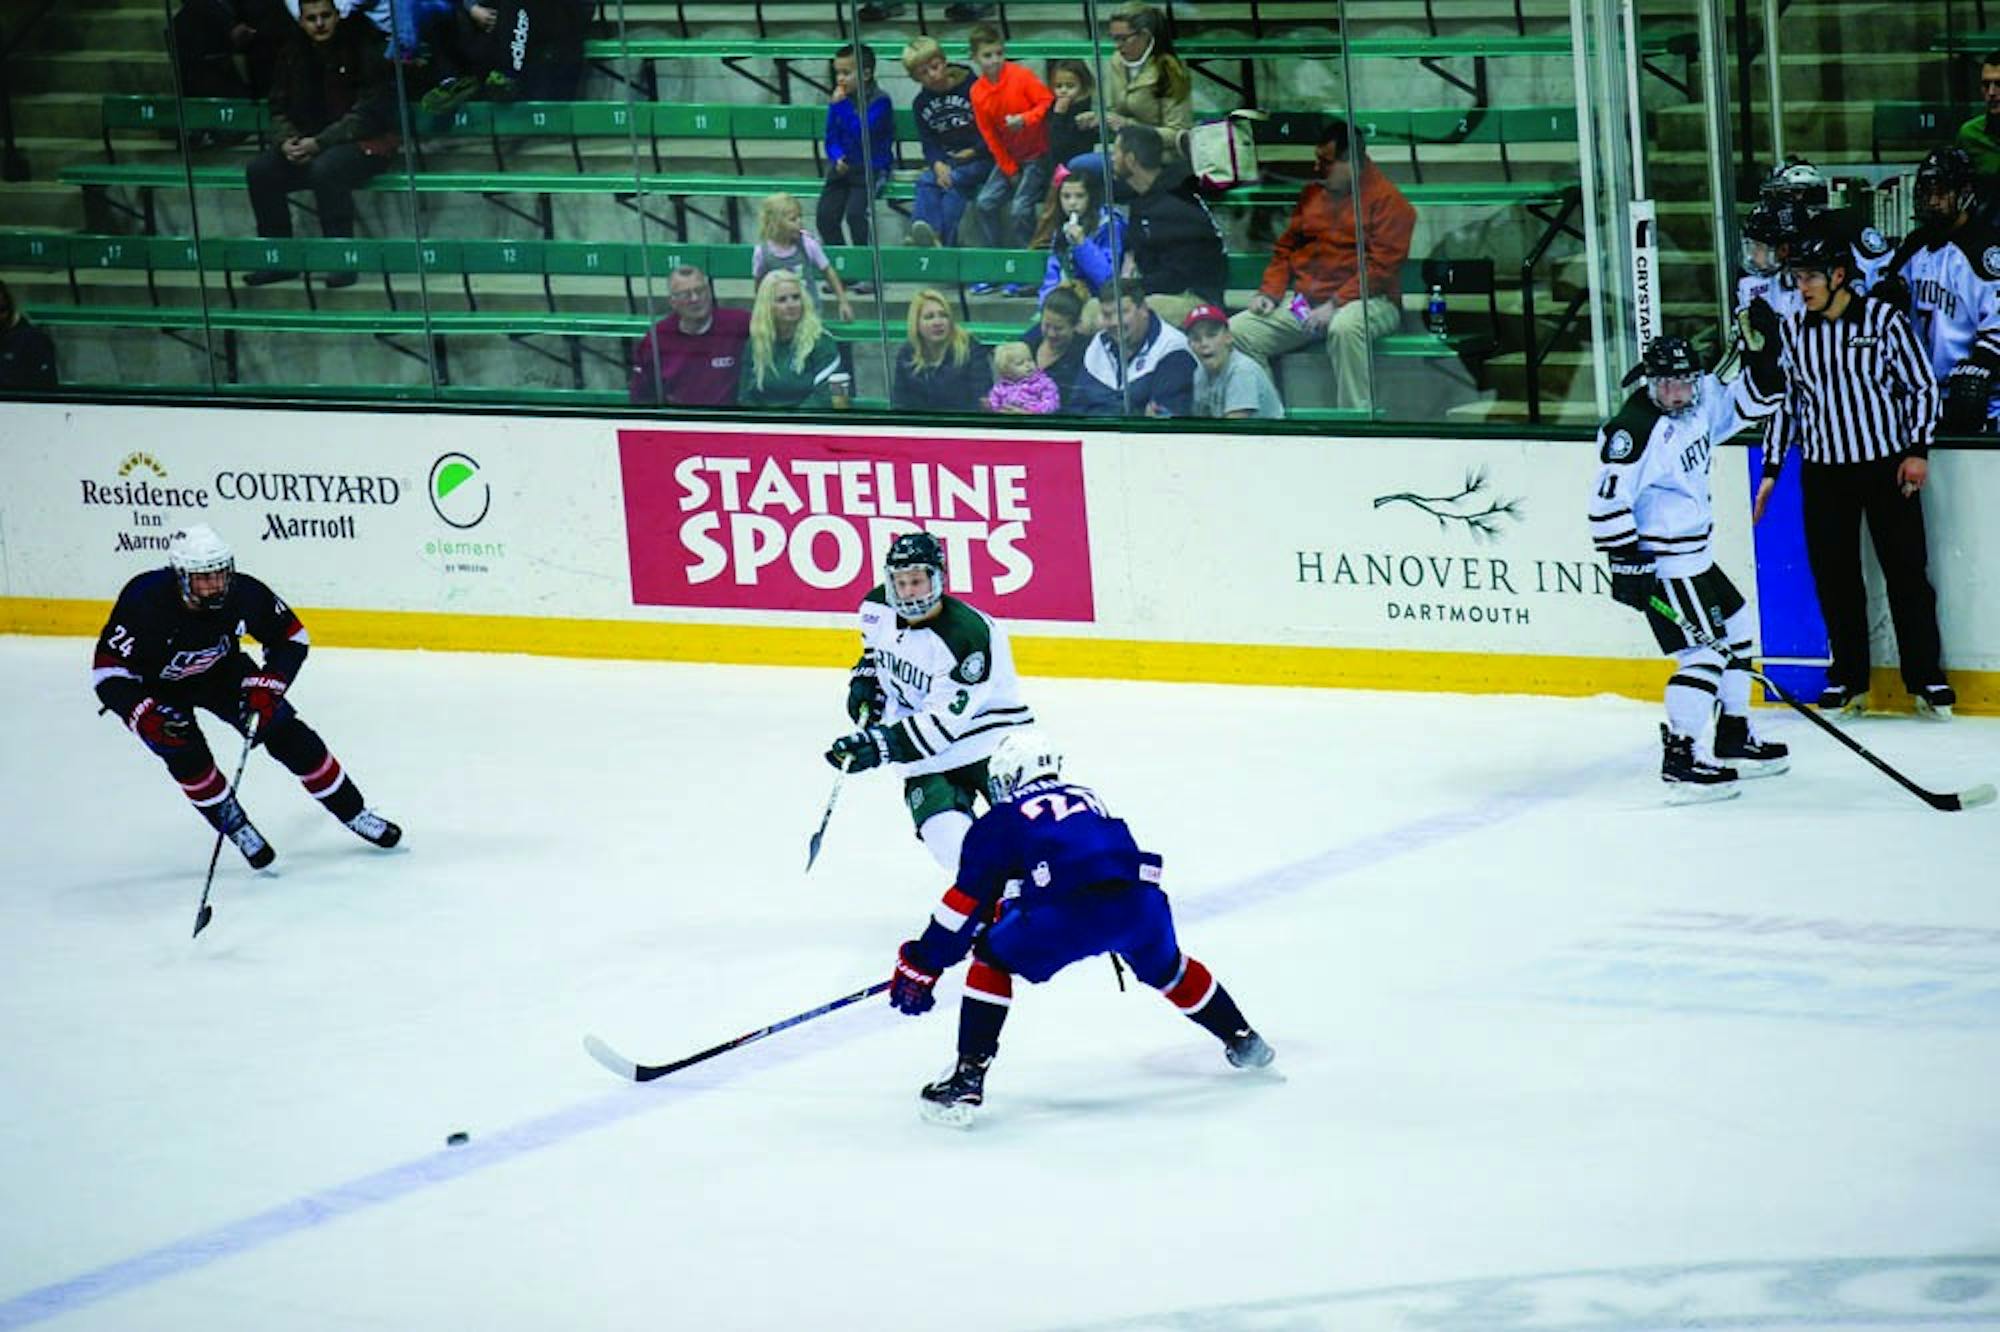 The Dartmouth men's hockey team is off to a solid 4-2-1 start in conference play.